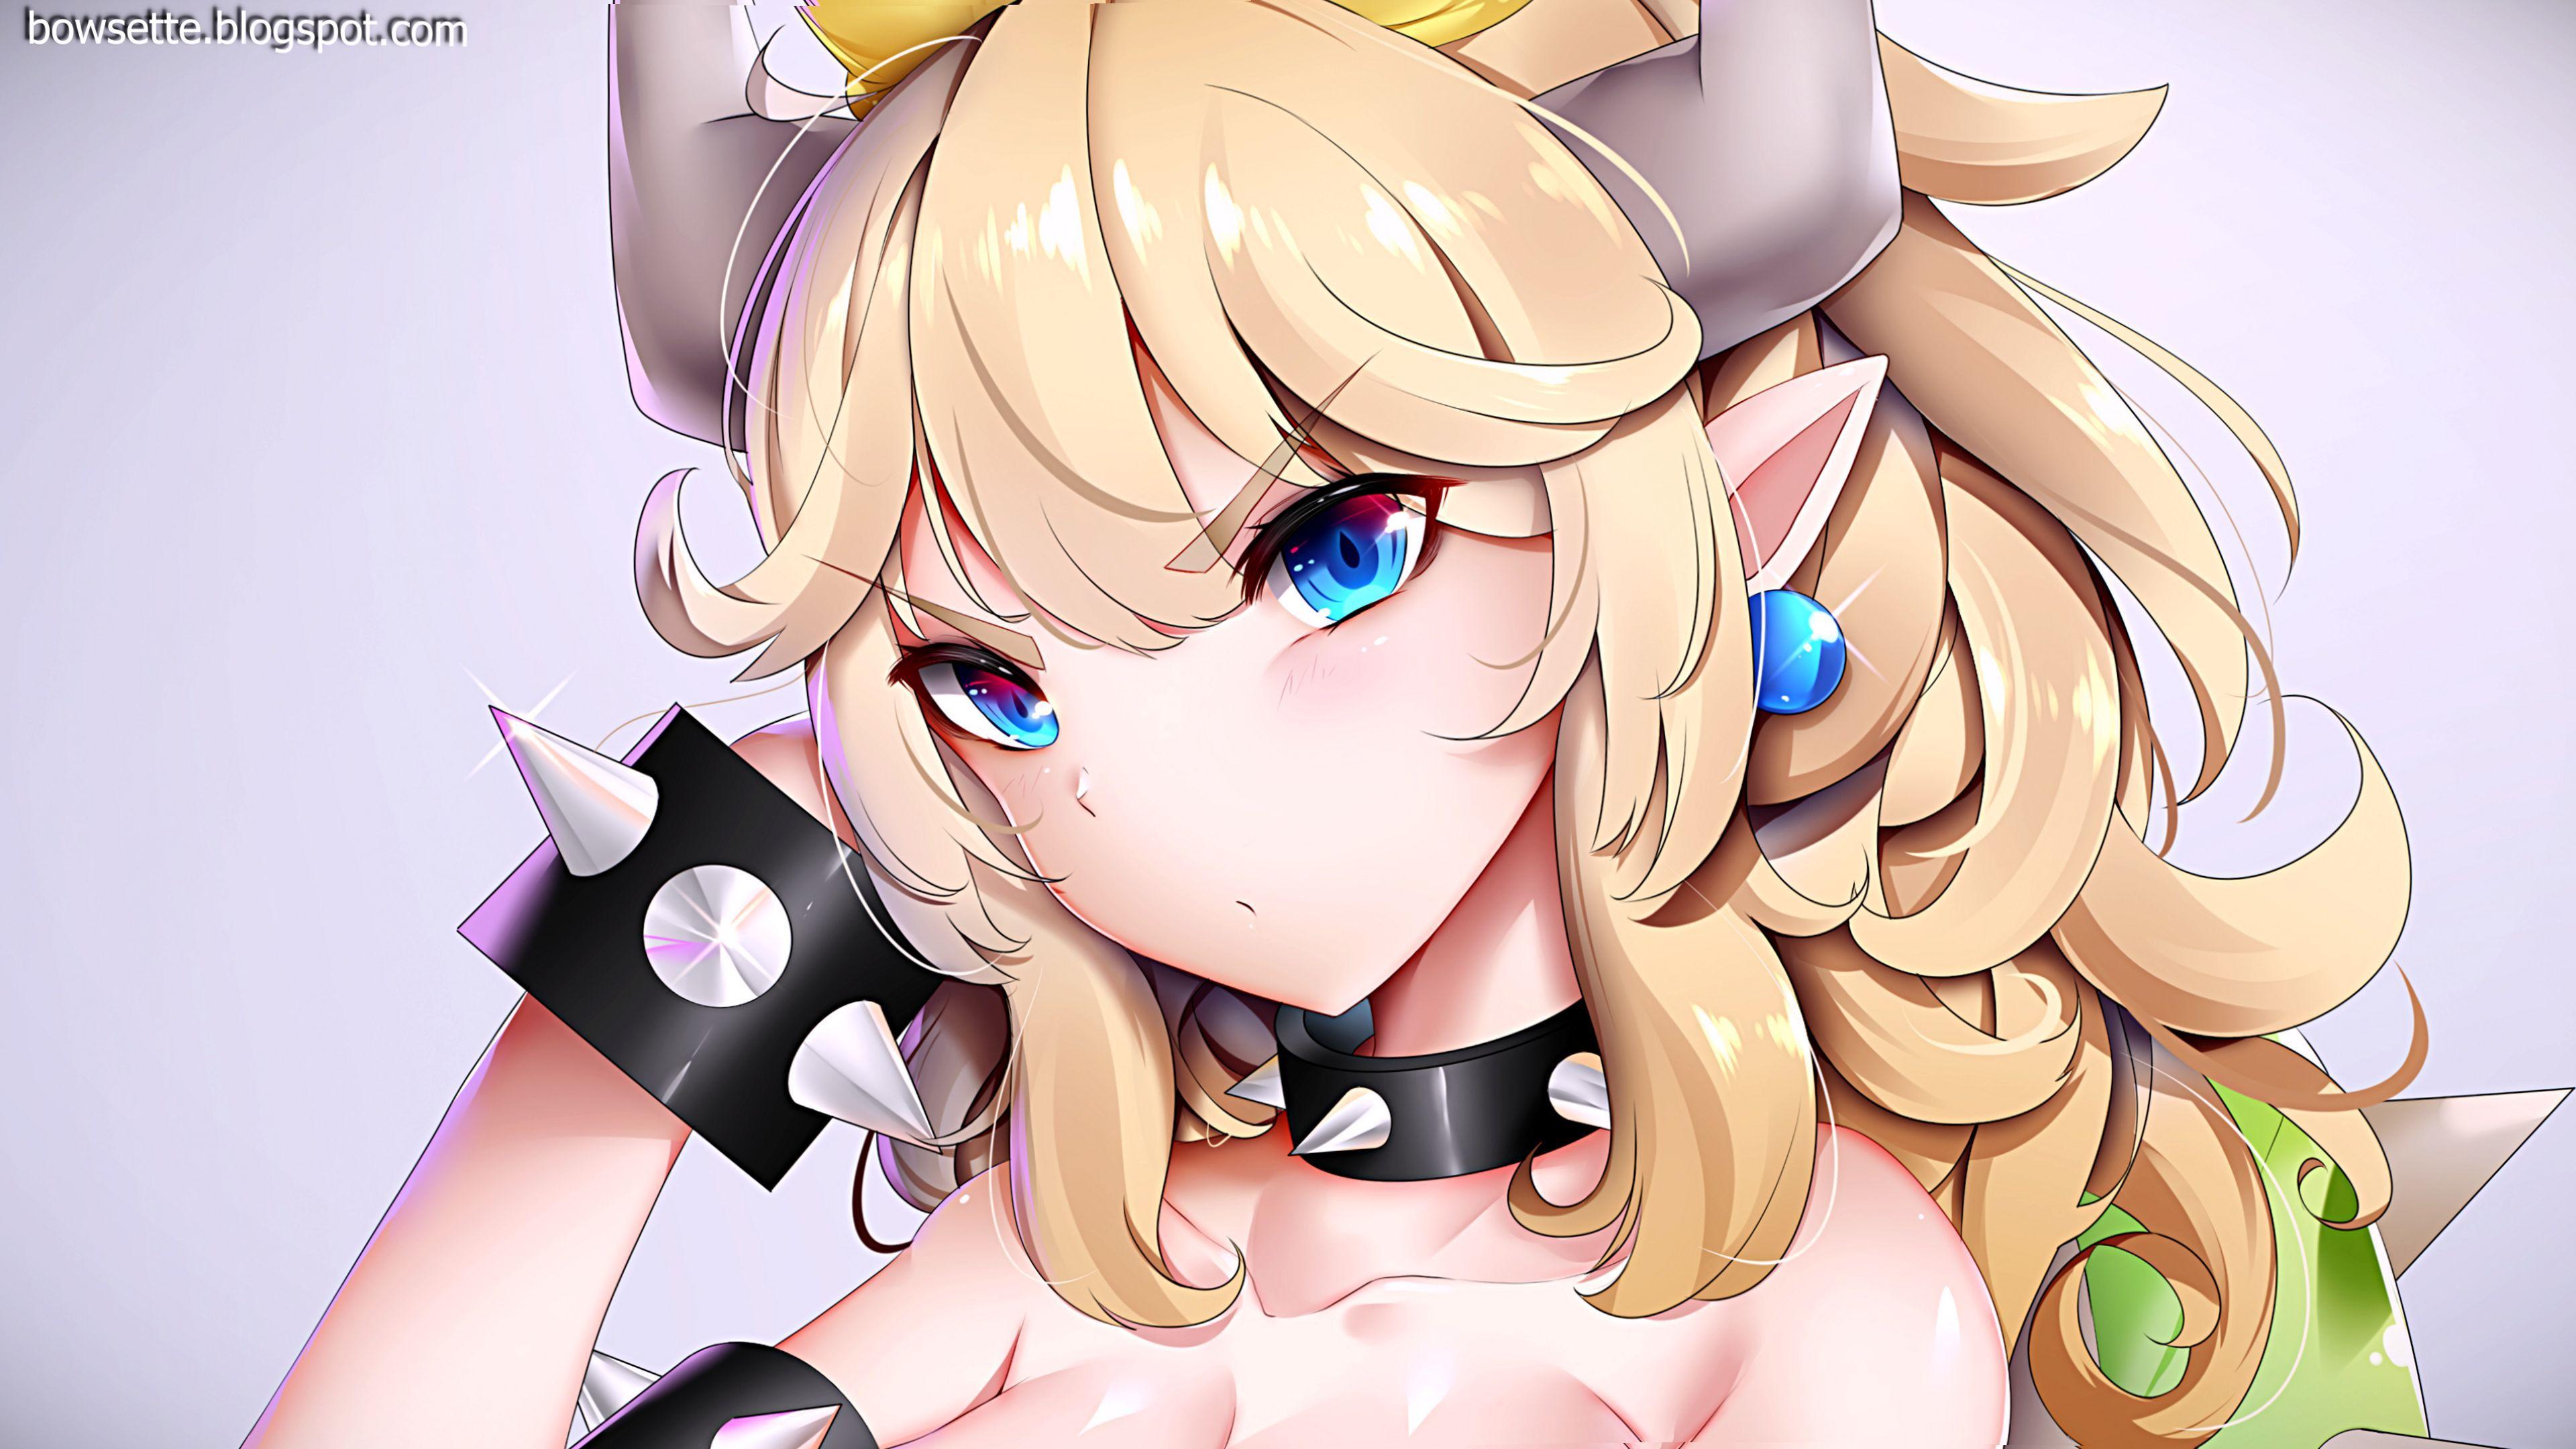 bowsette wallpapers.